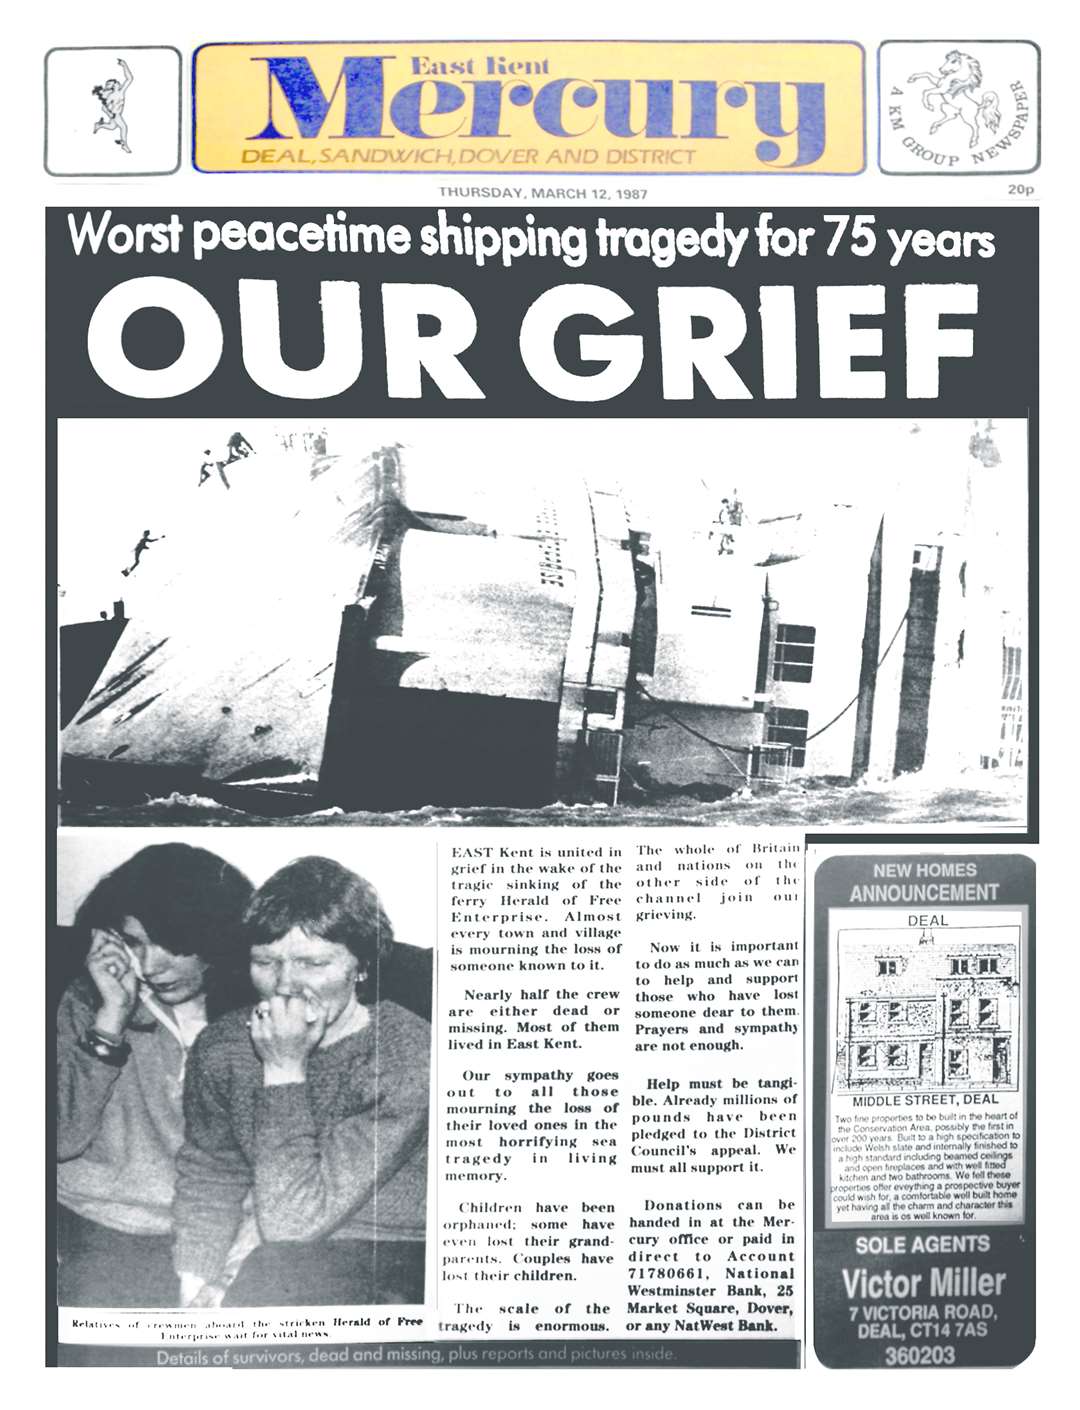 How the East Kent Mercury covered the tragedy, The edition of March 12, 1987